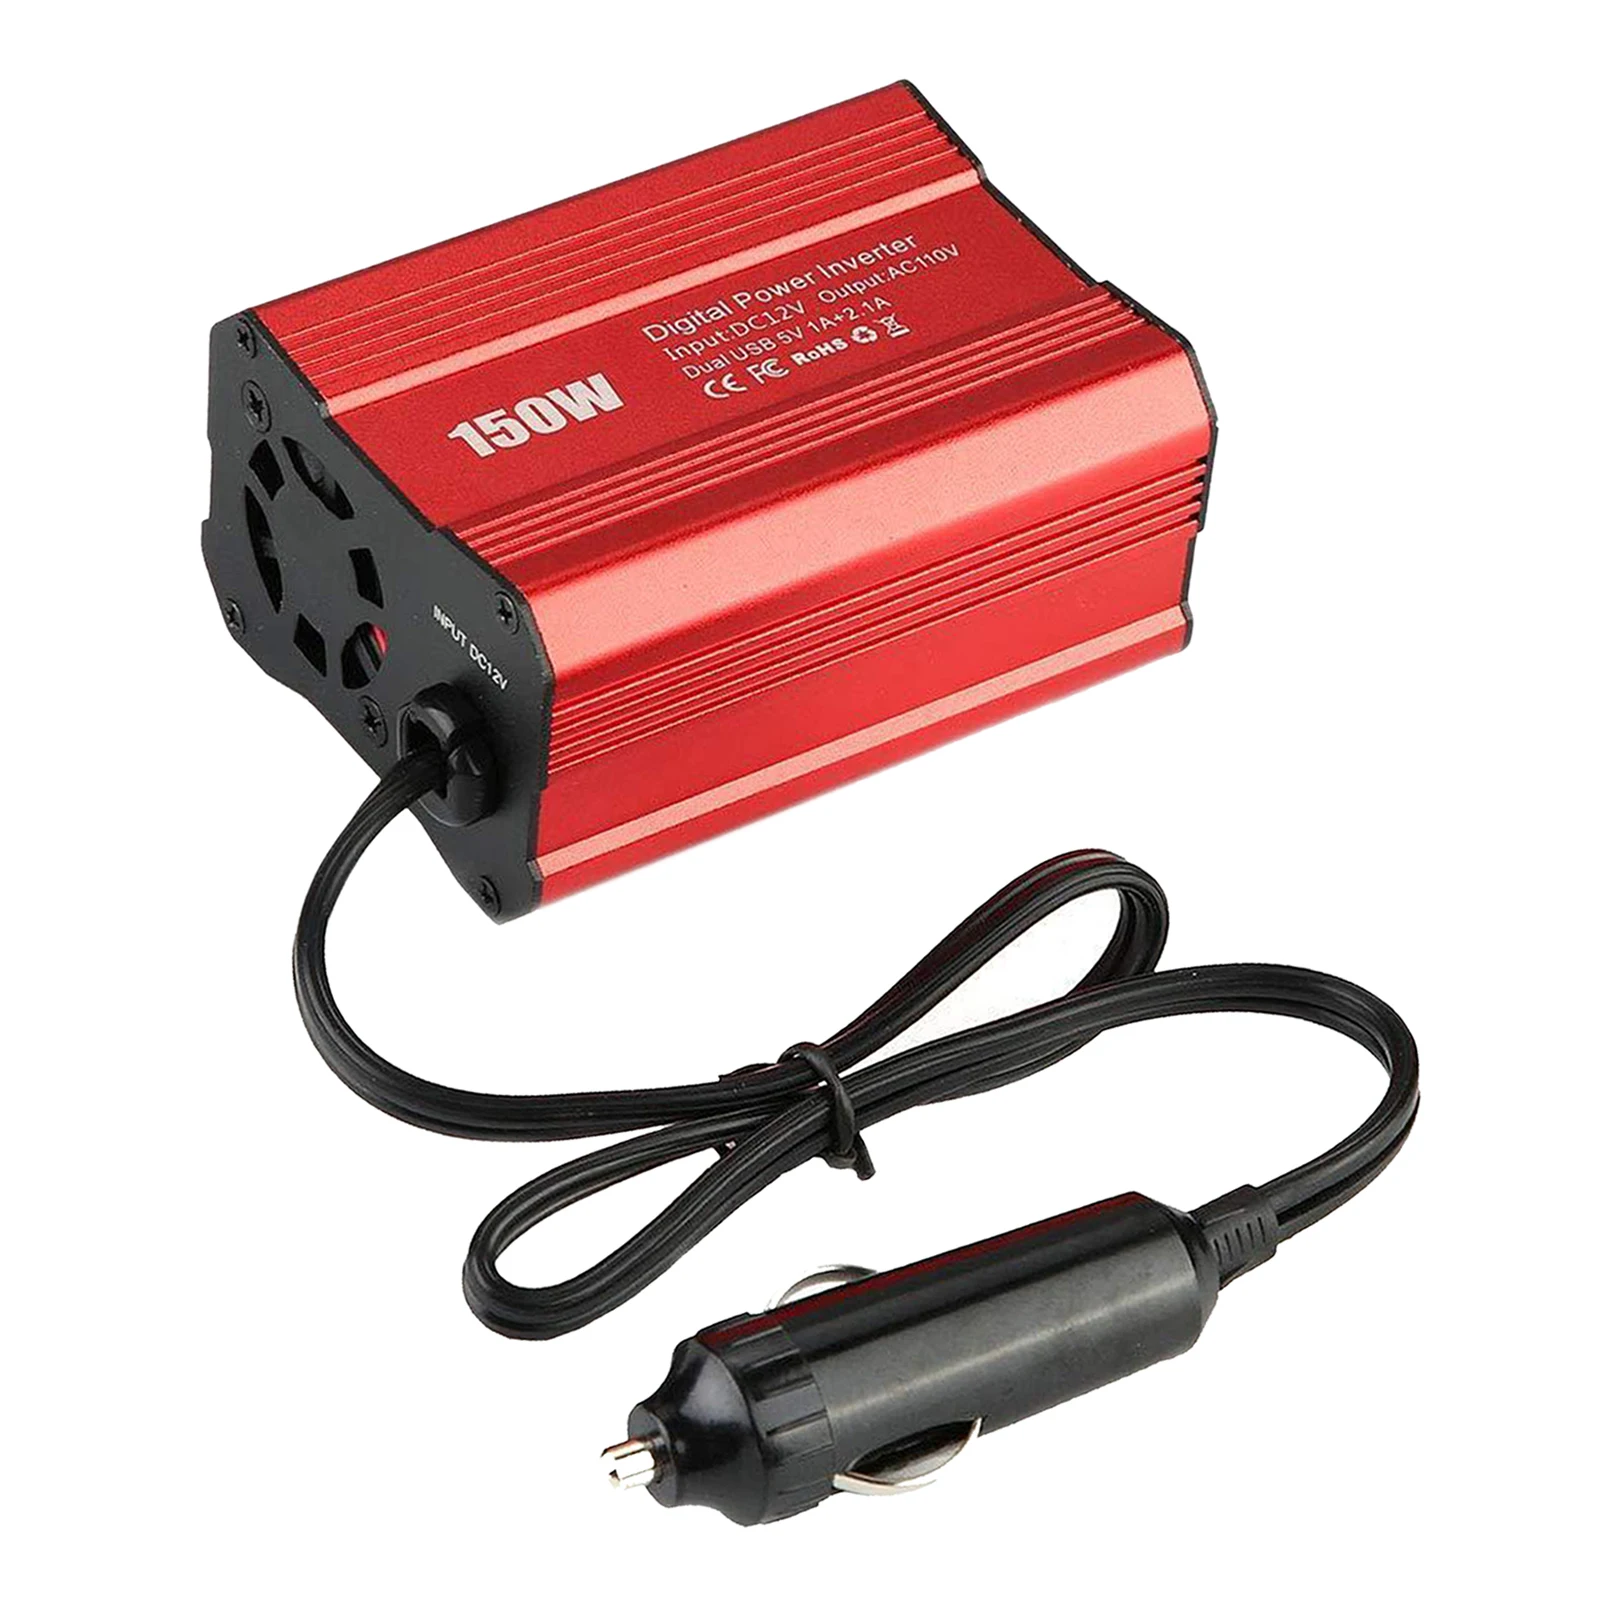 150W Car Power Inverter inversor DC 12V To AC 110V/220V 2.1A Dual USB Ports Car Charger Adapters